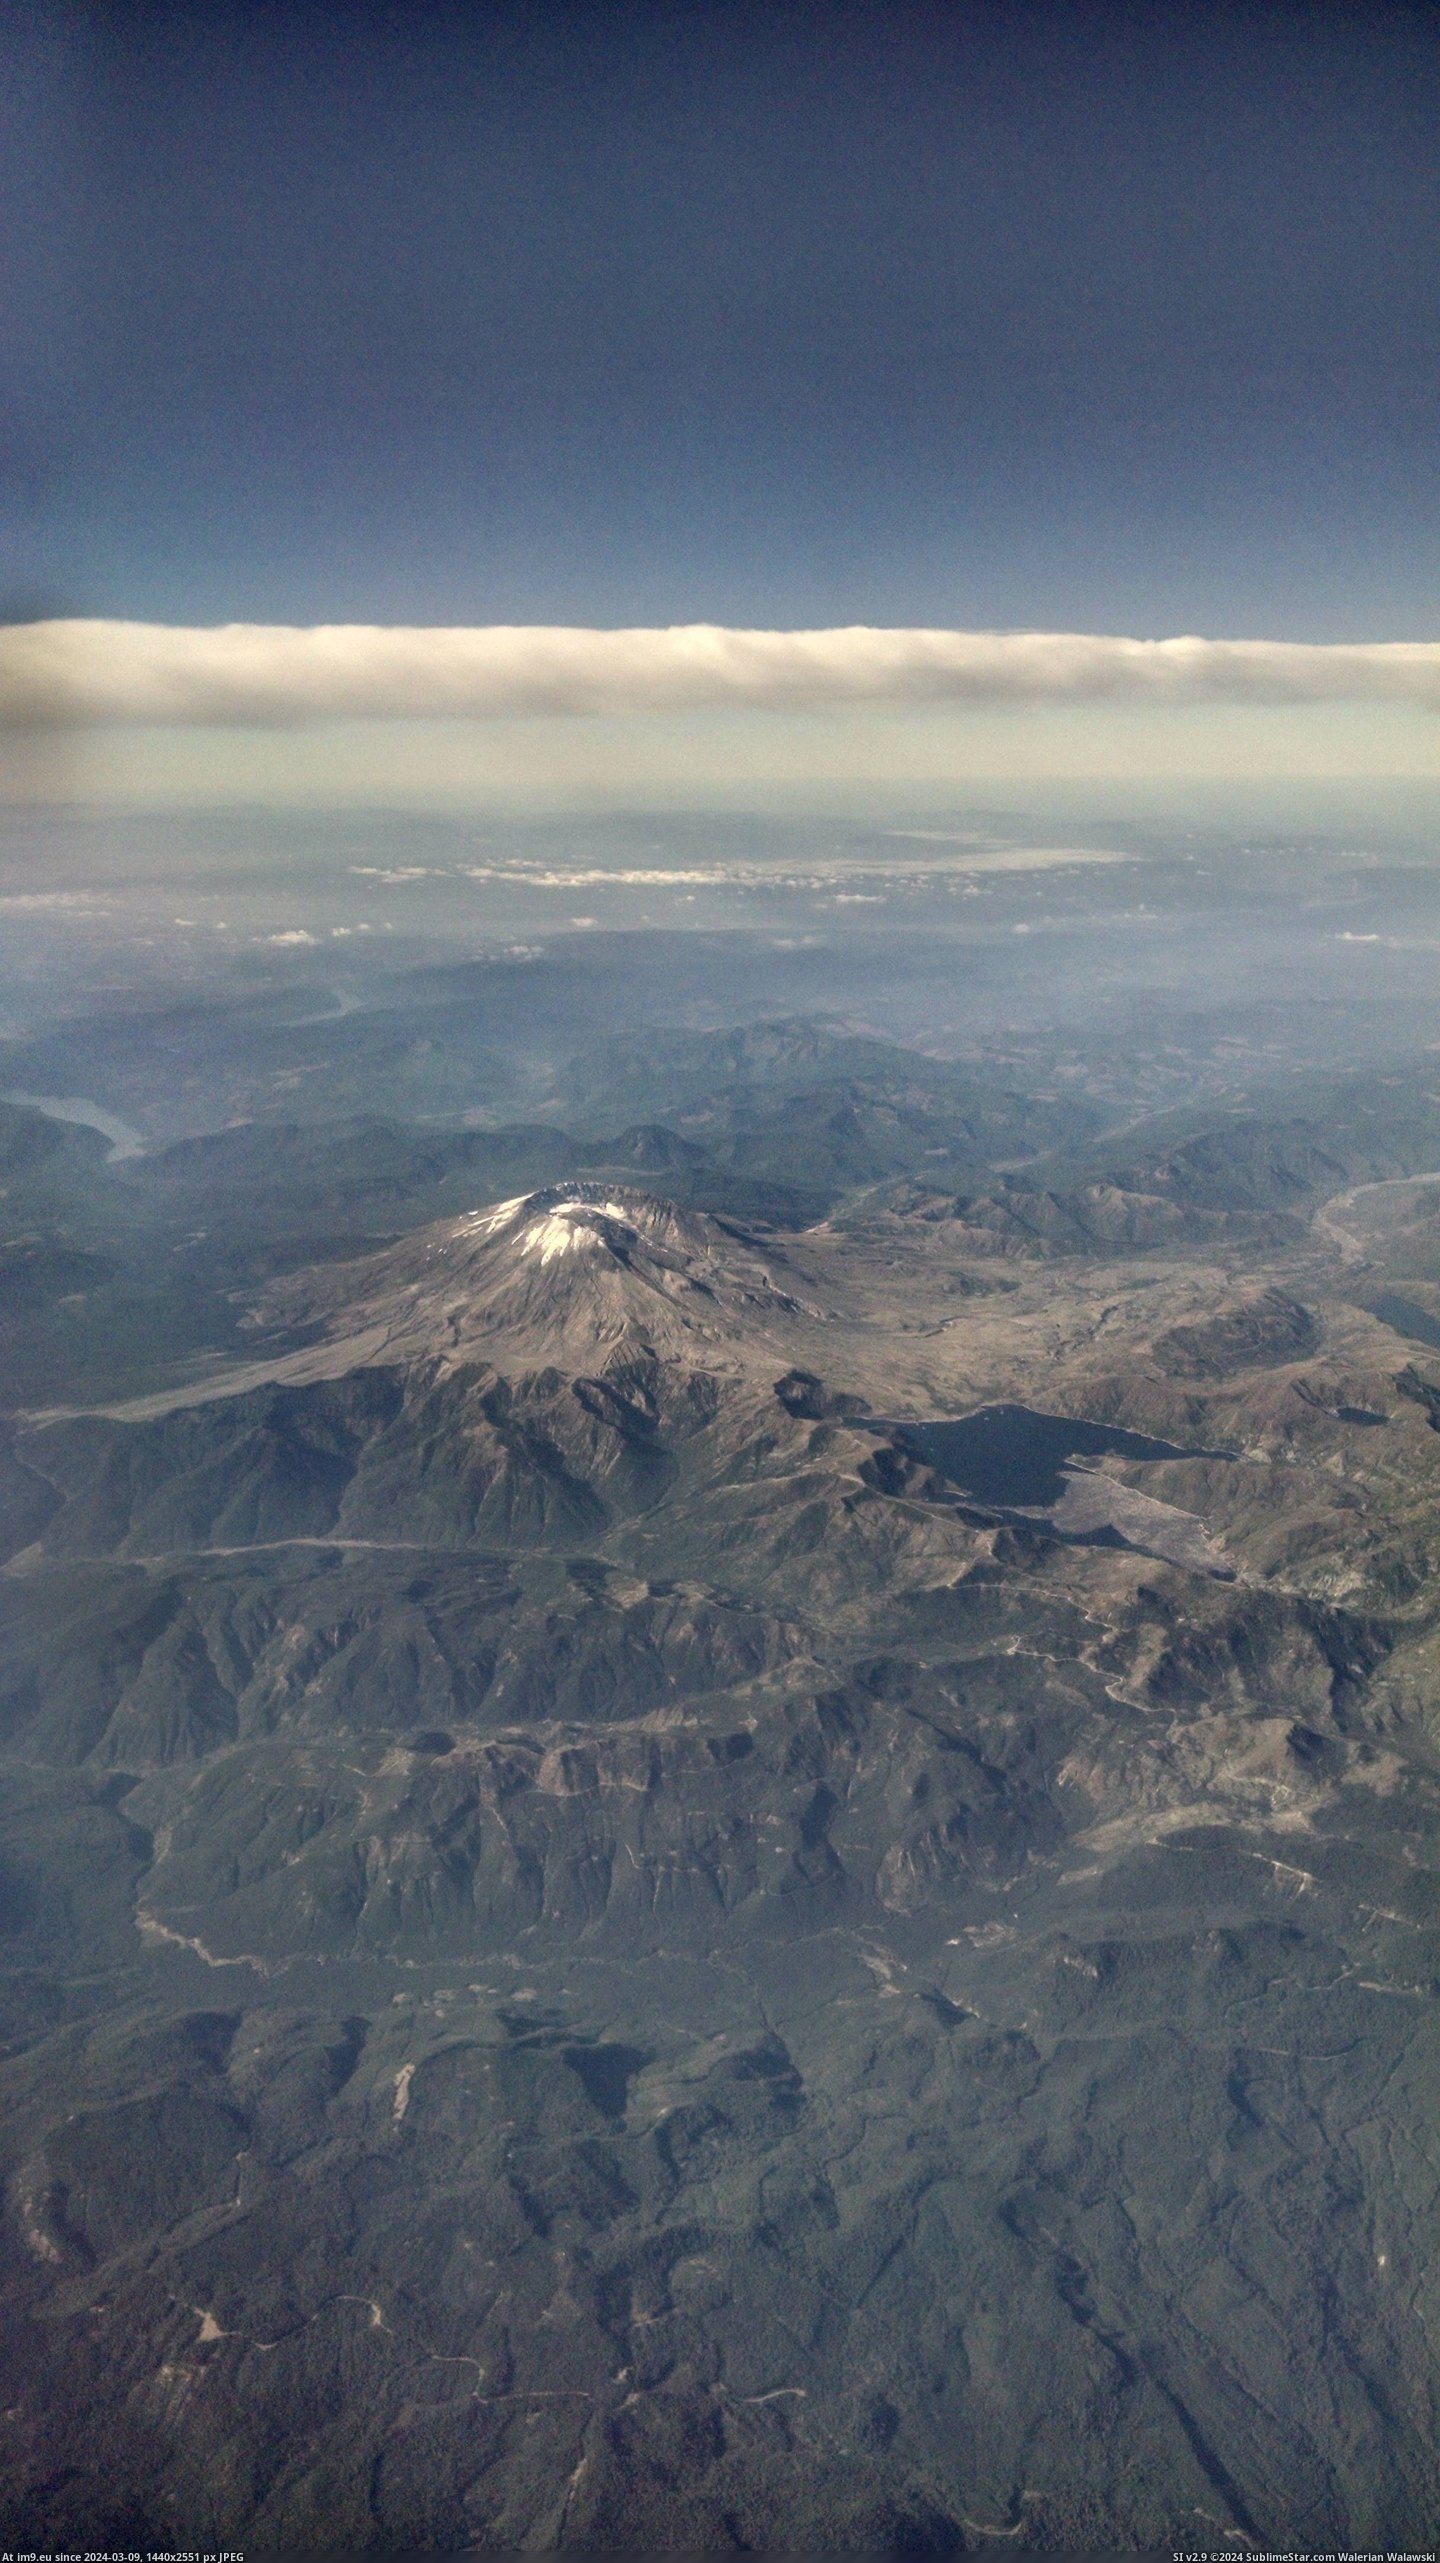 #Way #Air #Glad #Helens #Clearest #2432x4320 #Mount #Saint #Vegas [Earthporn] Mount Saint Helens. On my way to Vegas and it was clearest its been in a while. Glad I was in the air. [2432x4320] Pic. (Изображение из альбом My r/EARTHPORN favs))